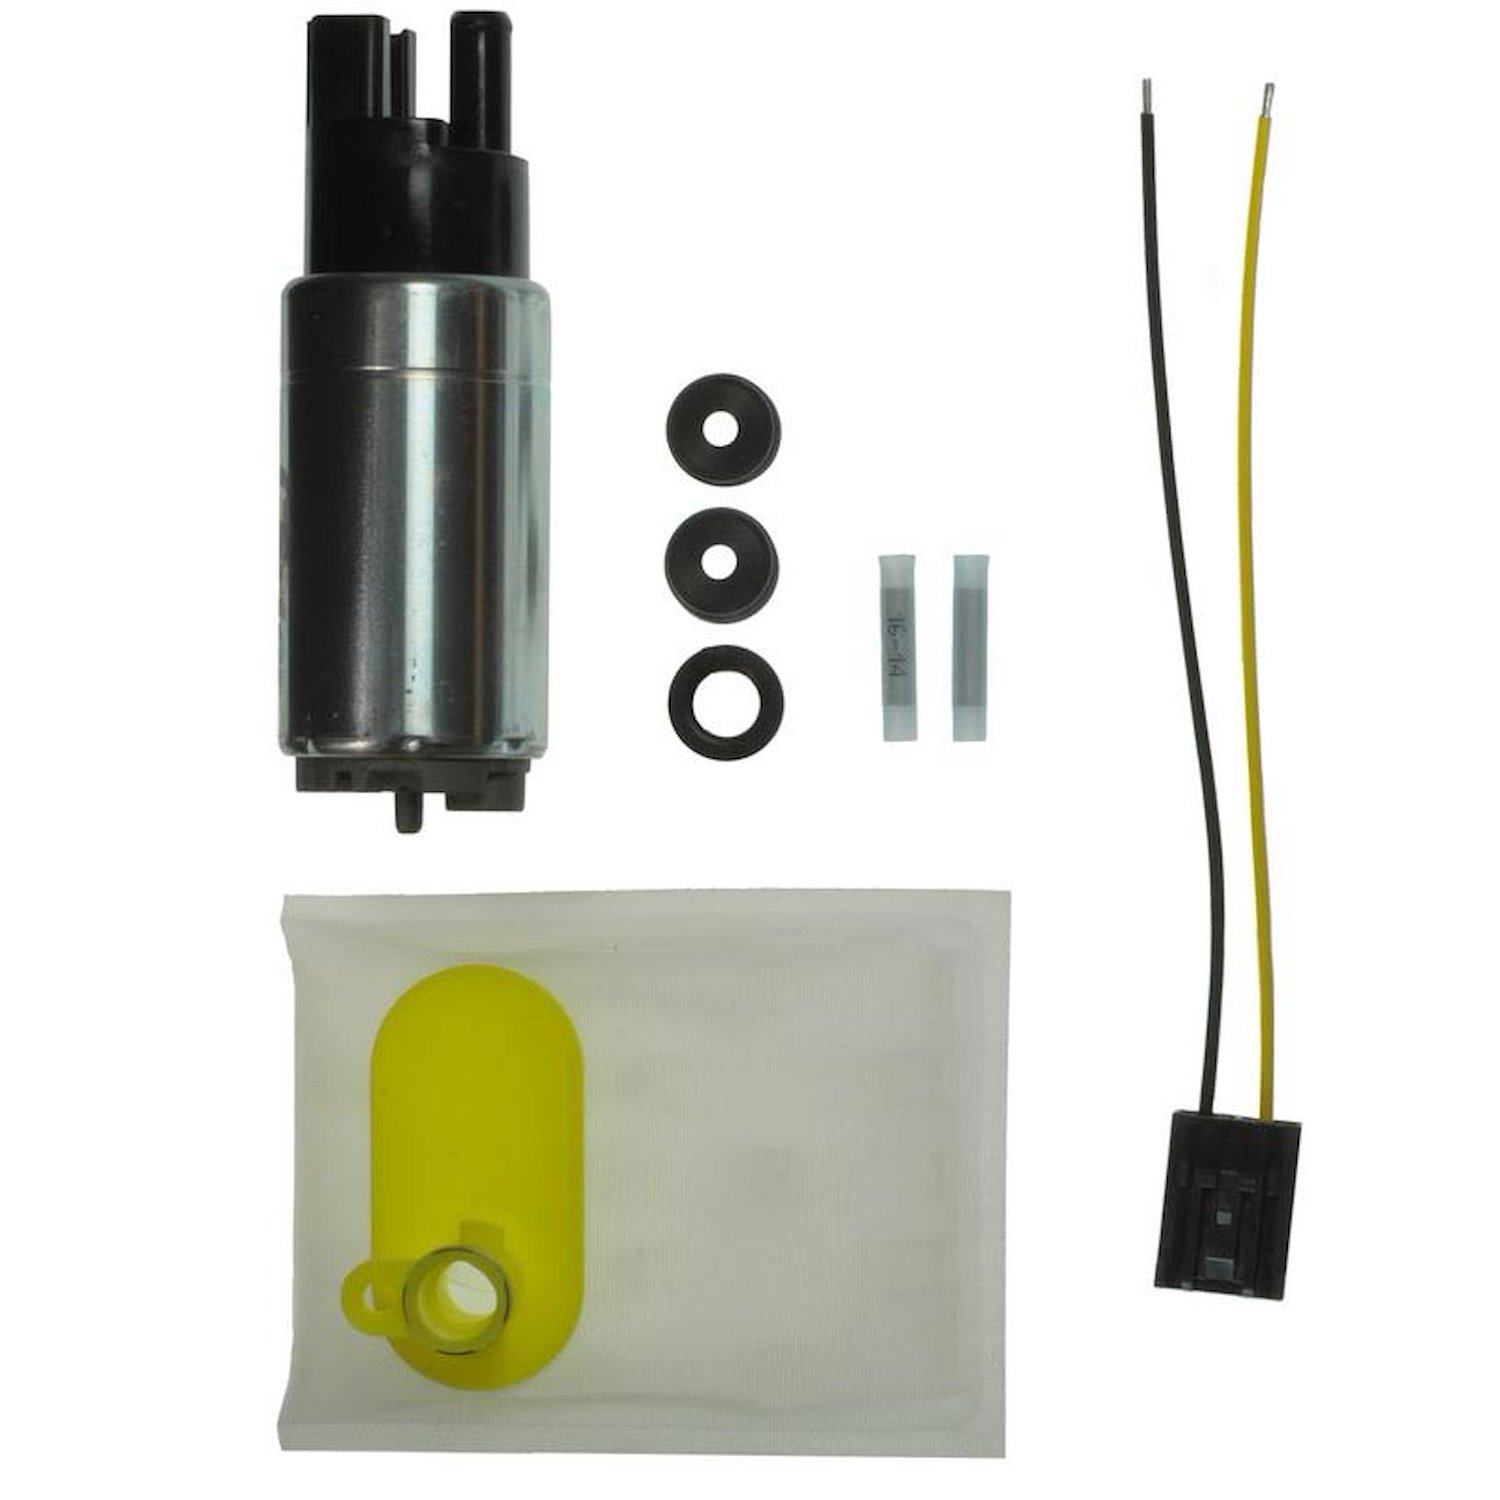 EFI In-Tank Electric Fuel Pump and Strainer Set for 2006-2009 Honda S2000